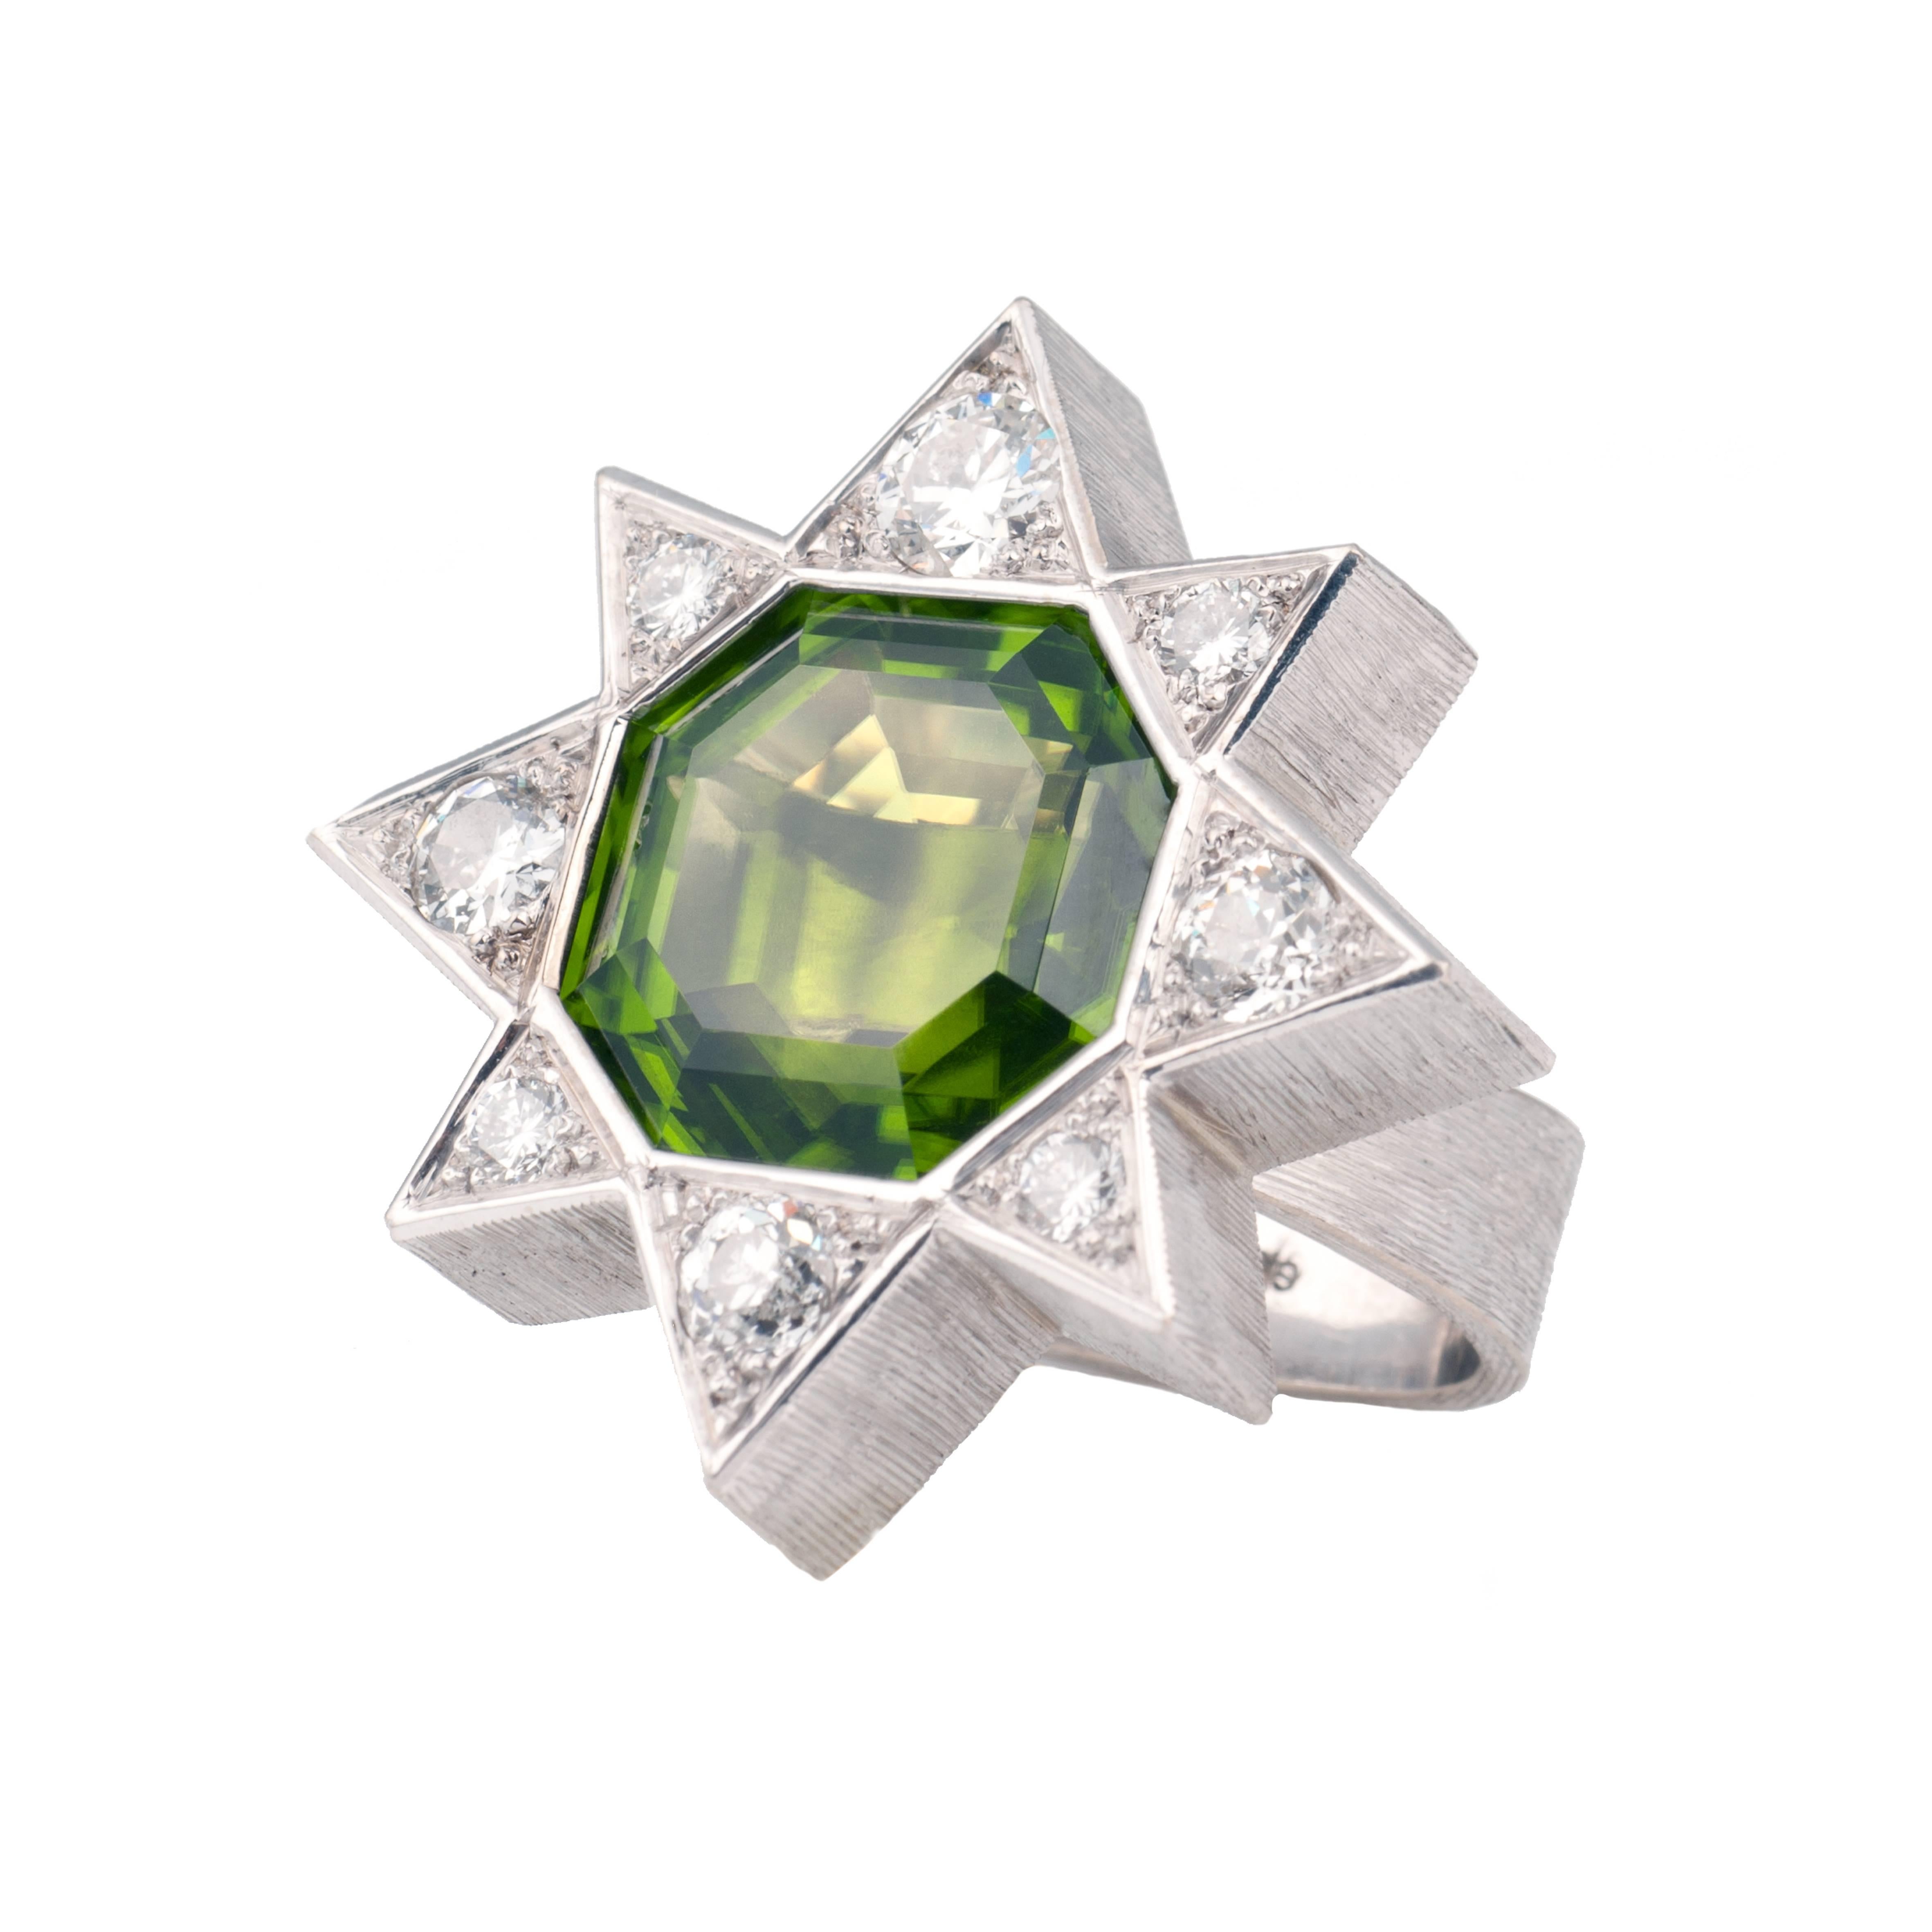 Designed by Andrew Grima in 2000
This cocktail ring features a large octagonal-cut peridot (23.15cts) set in white gold surrounded by eight brilliant-cut diamonds (1.9cts).  
Stirrup-shaped shank. Signed GRIMA, London hallmark for 2000. 

UK Size: M